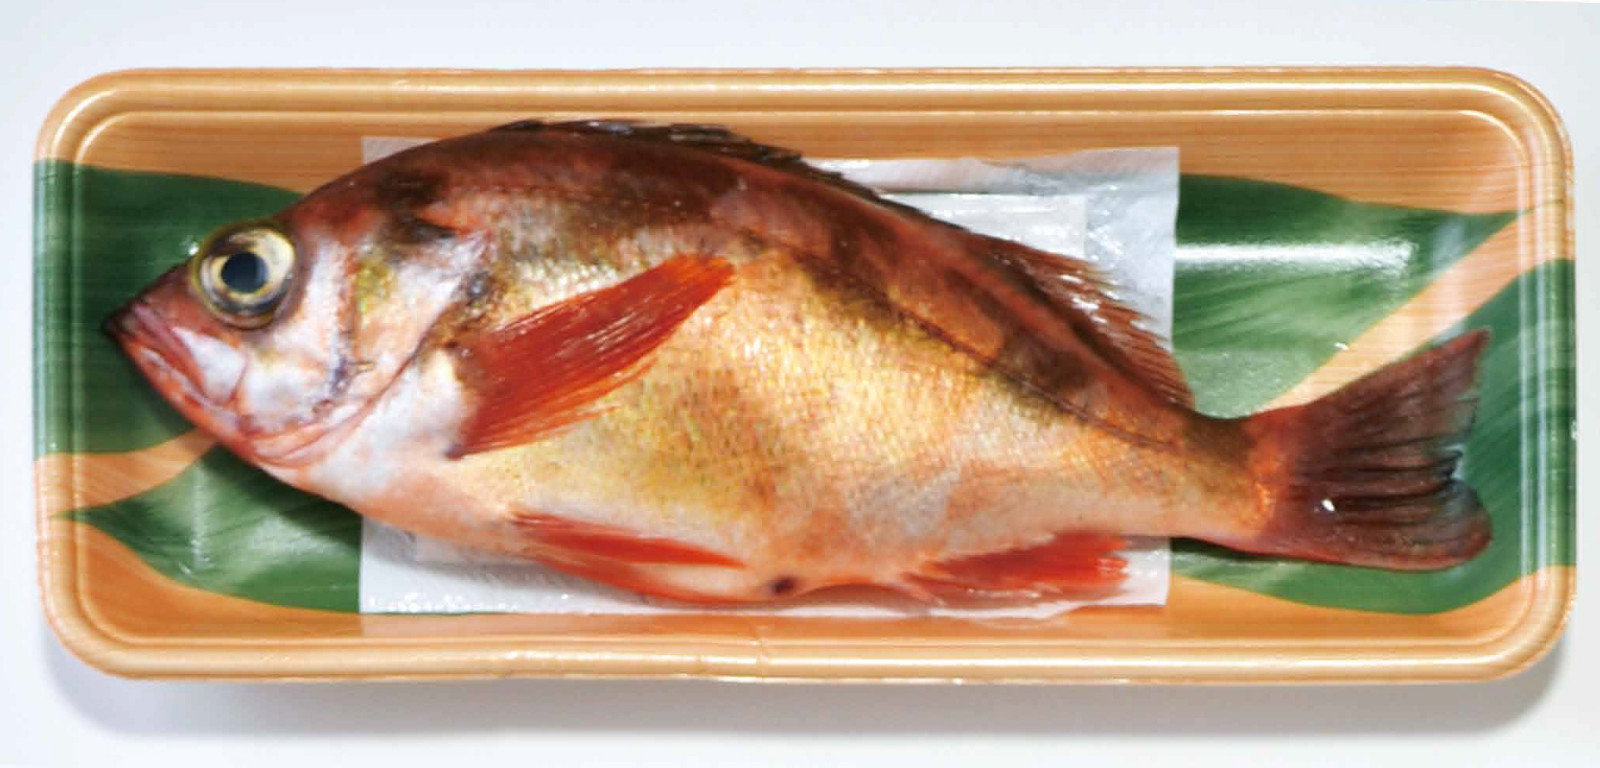 Demi designed food absorbent pad to absorb excess oil for cut fish fillets